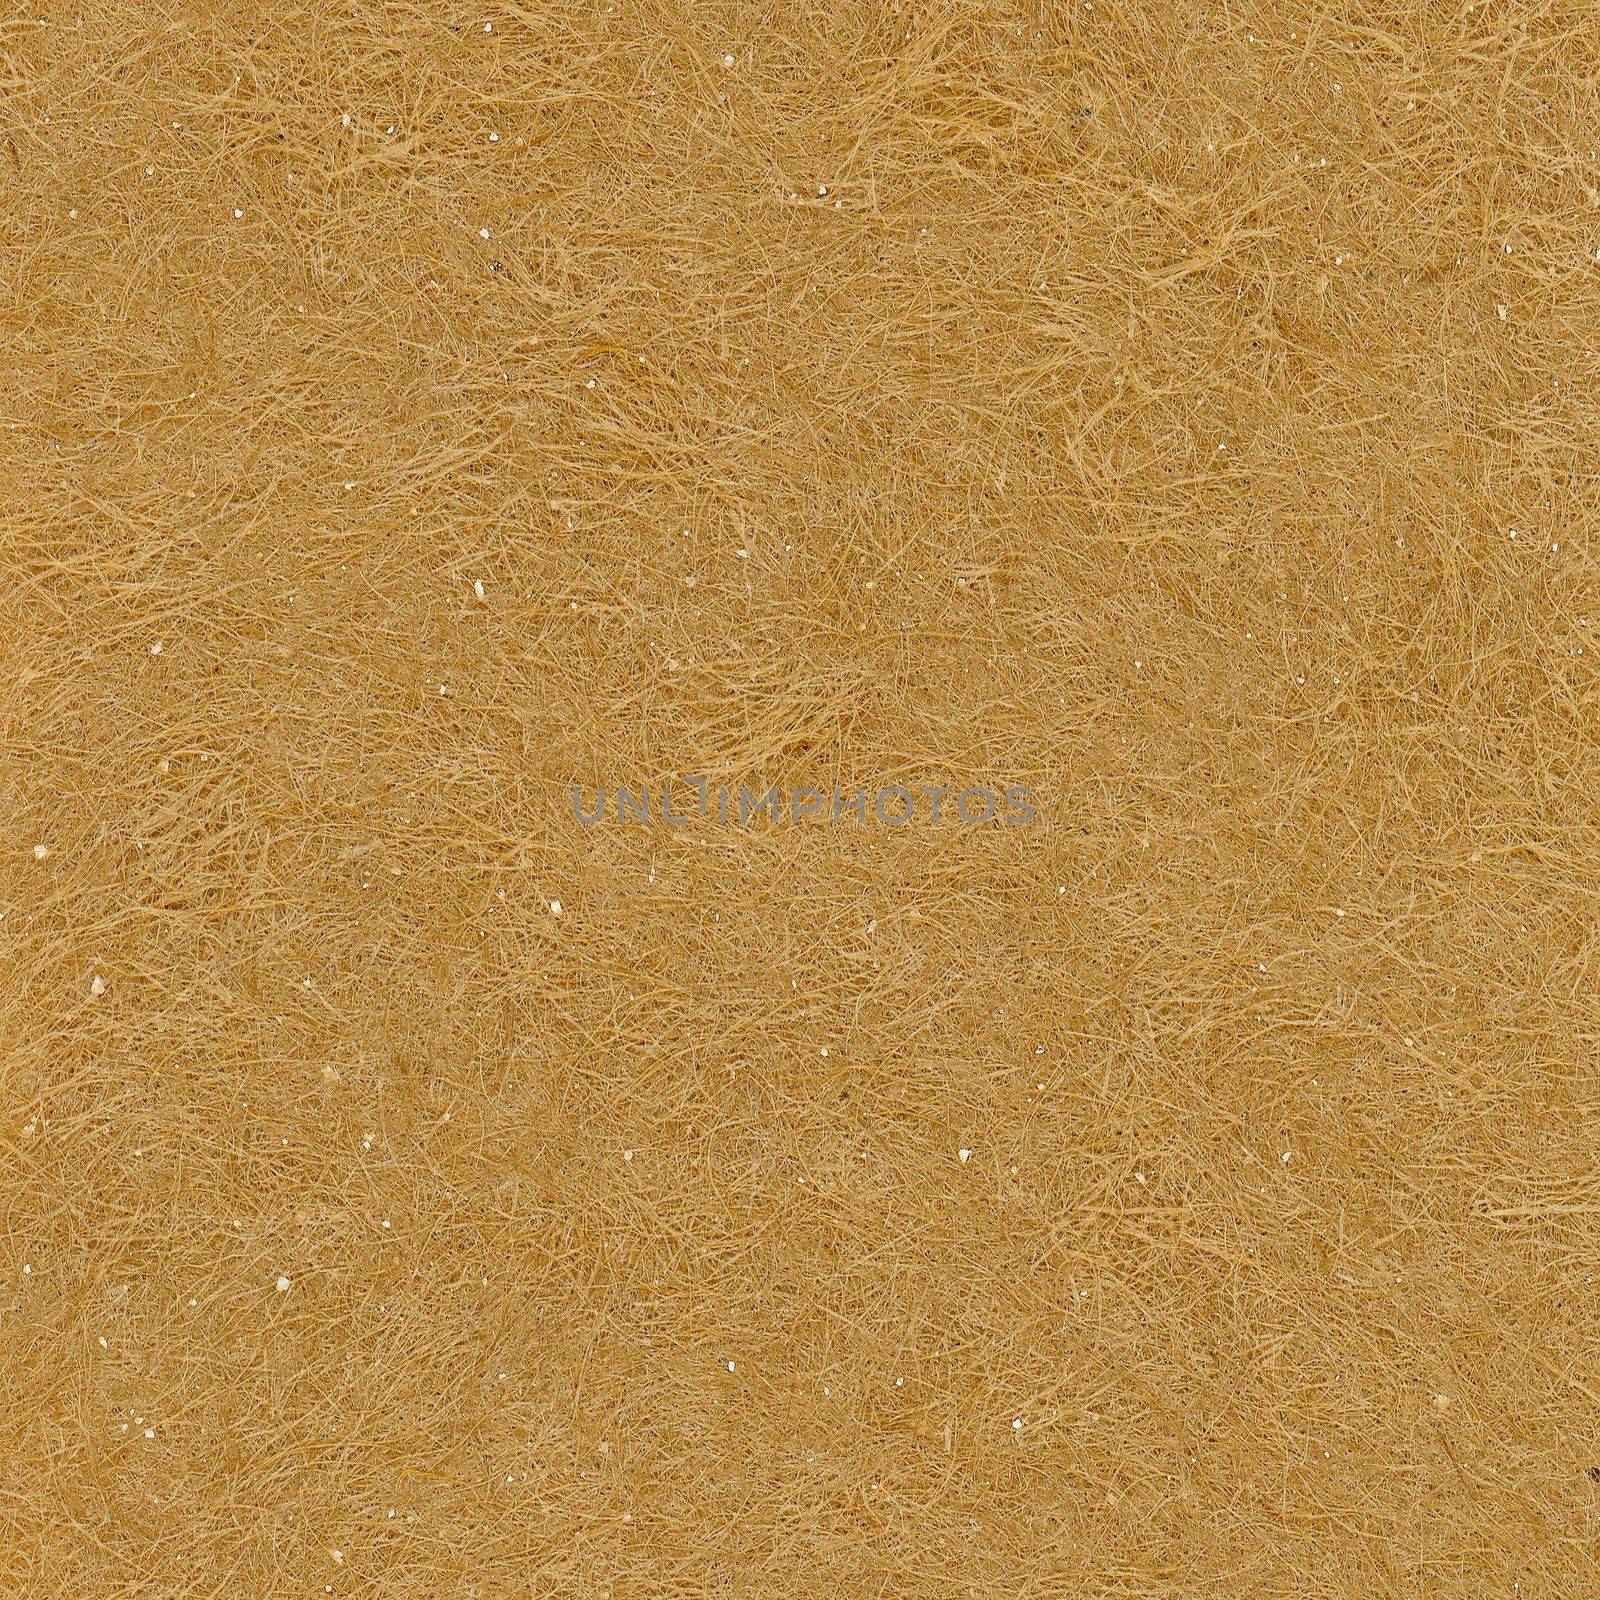 micrograph view of brown cardboard, with fibres of cellulose pulp derived from wood clearly visible